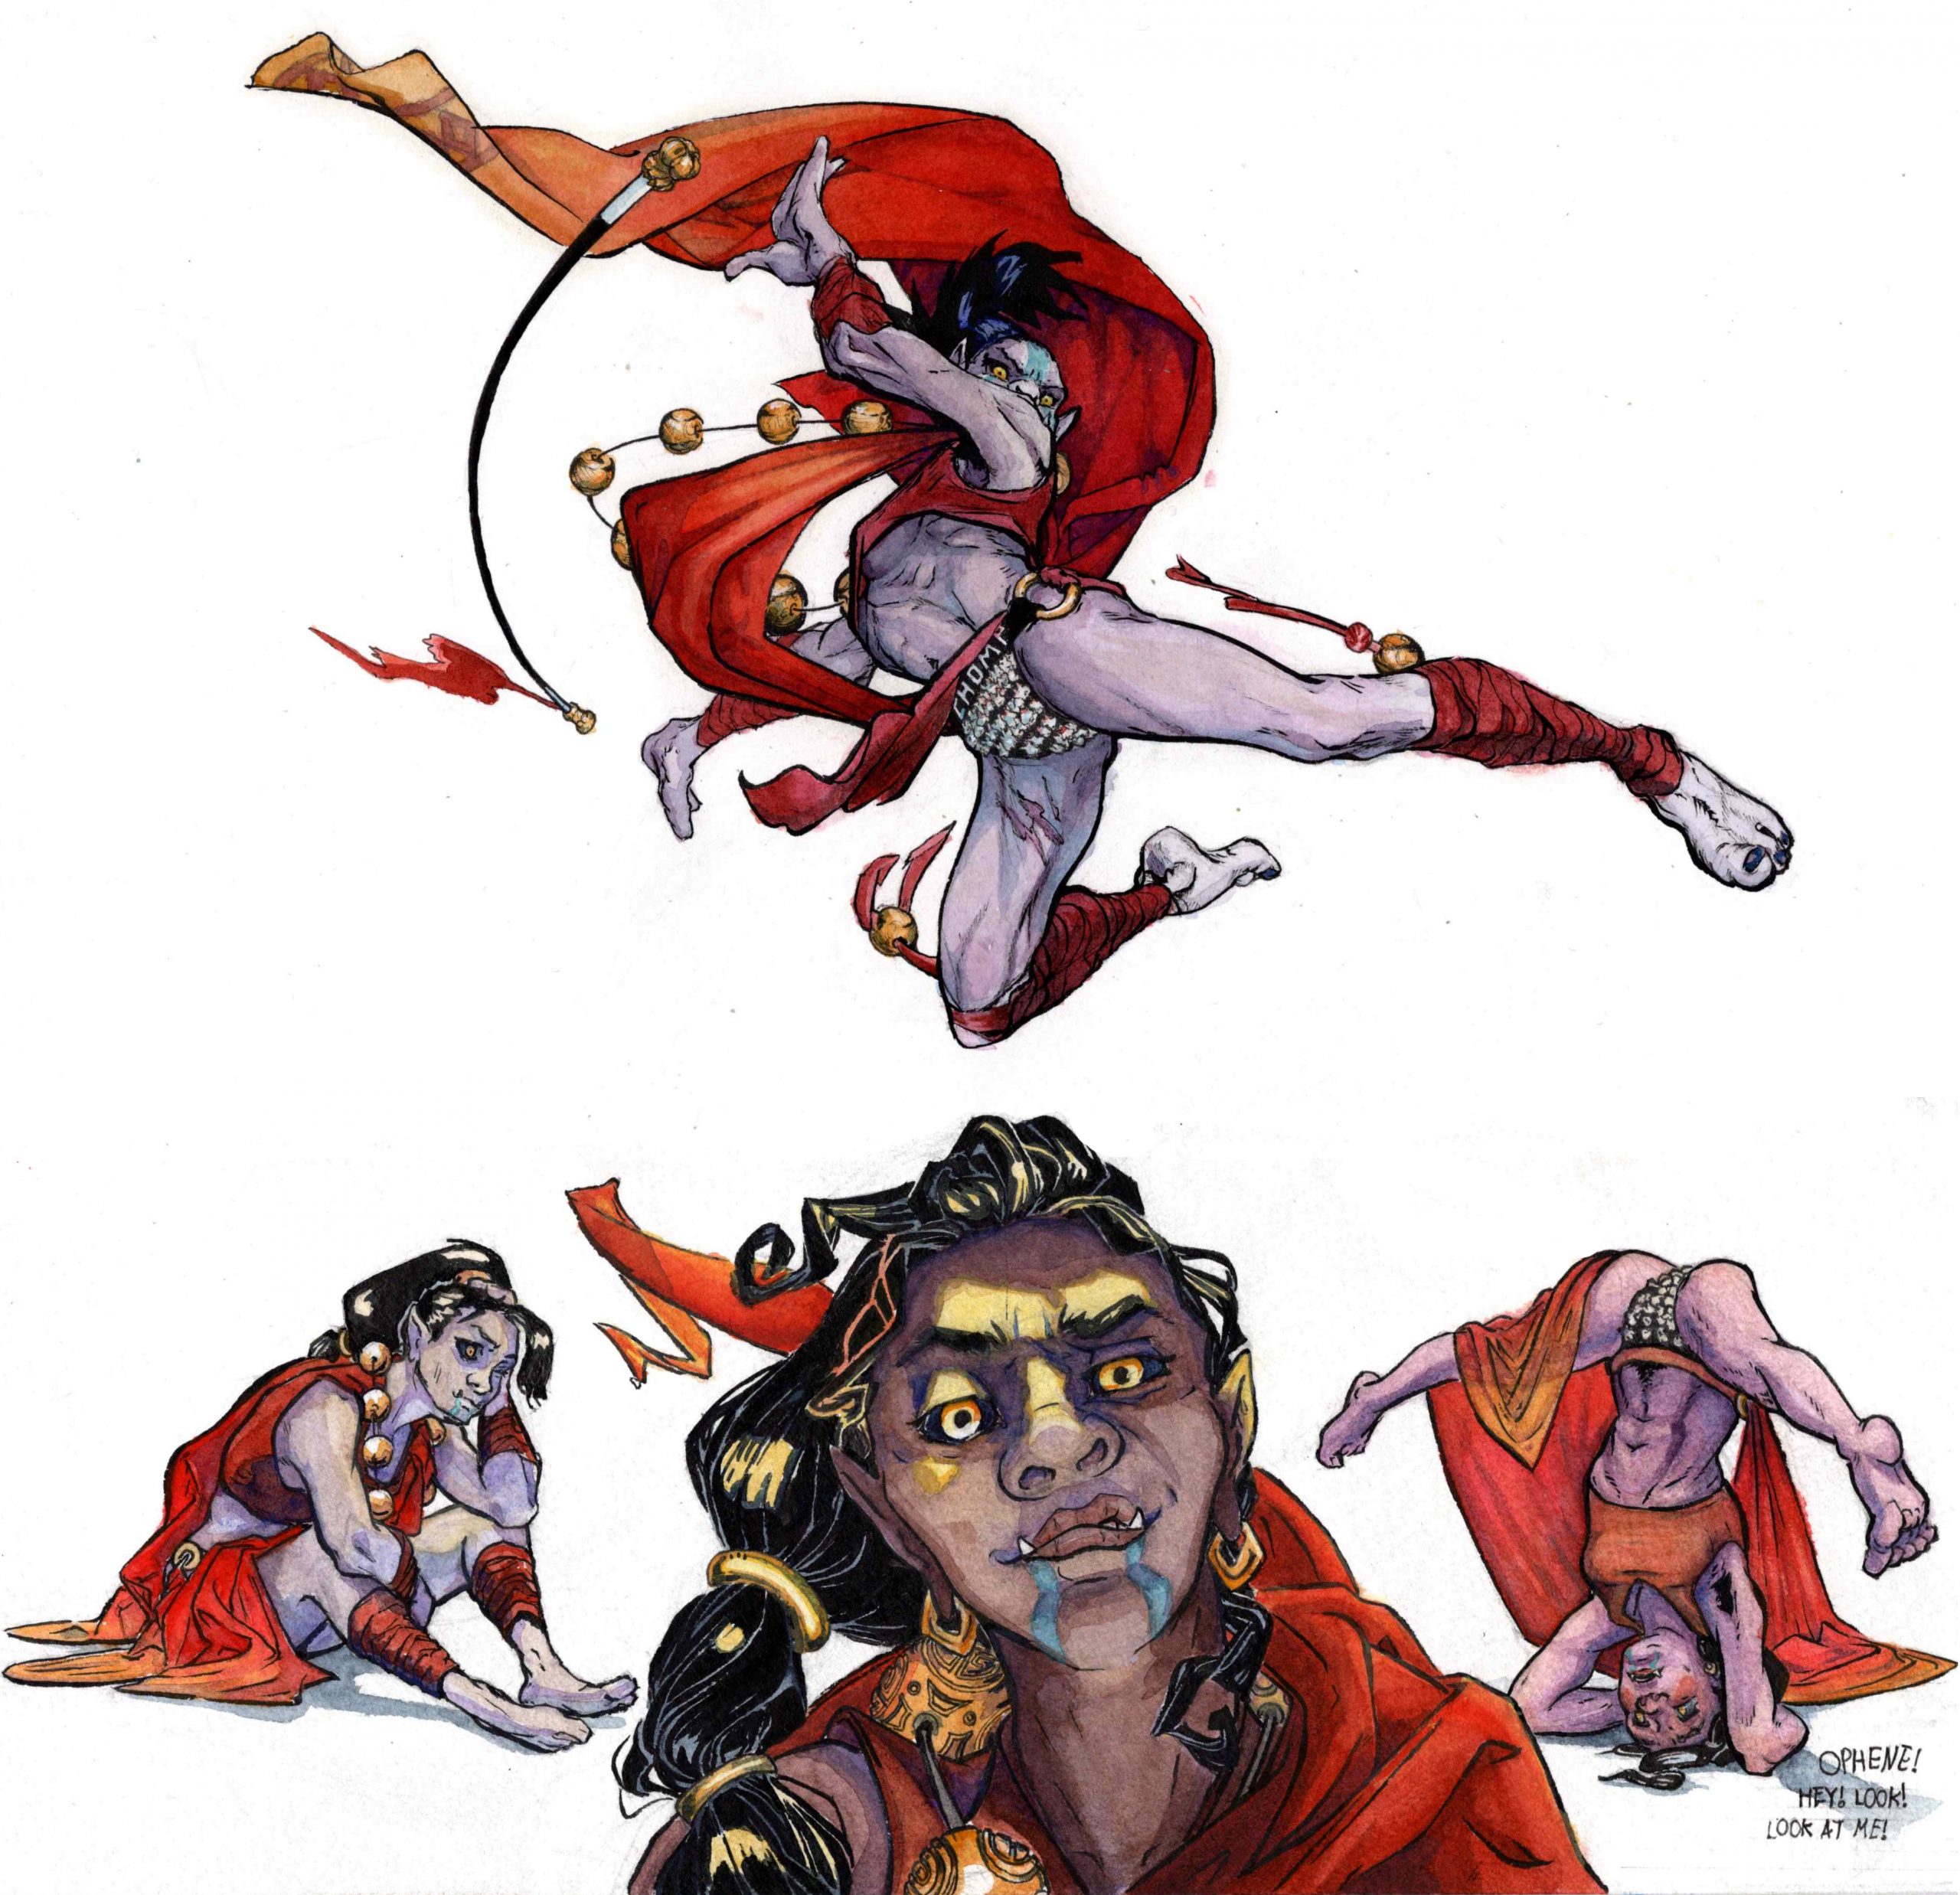 a compilation of 4 images of the same character of an orc princess. The top has the princess leaping in some kind of warrior-like move with a billowing red cape and underwear made of teeth that says "chomp". Along the bottom is the princess doing a headstand and saying "Hey ophene, look at me!", a closeup of the orc princess' face looking smug and lit from above, and then finally the orc princess sitting in thoughtful repose.